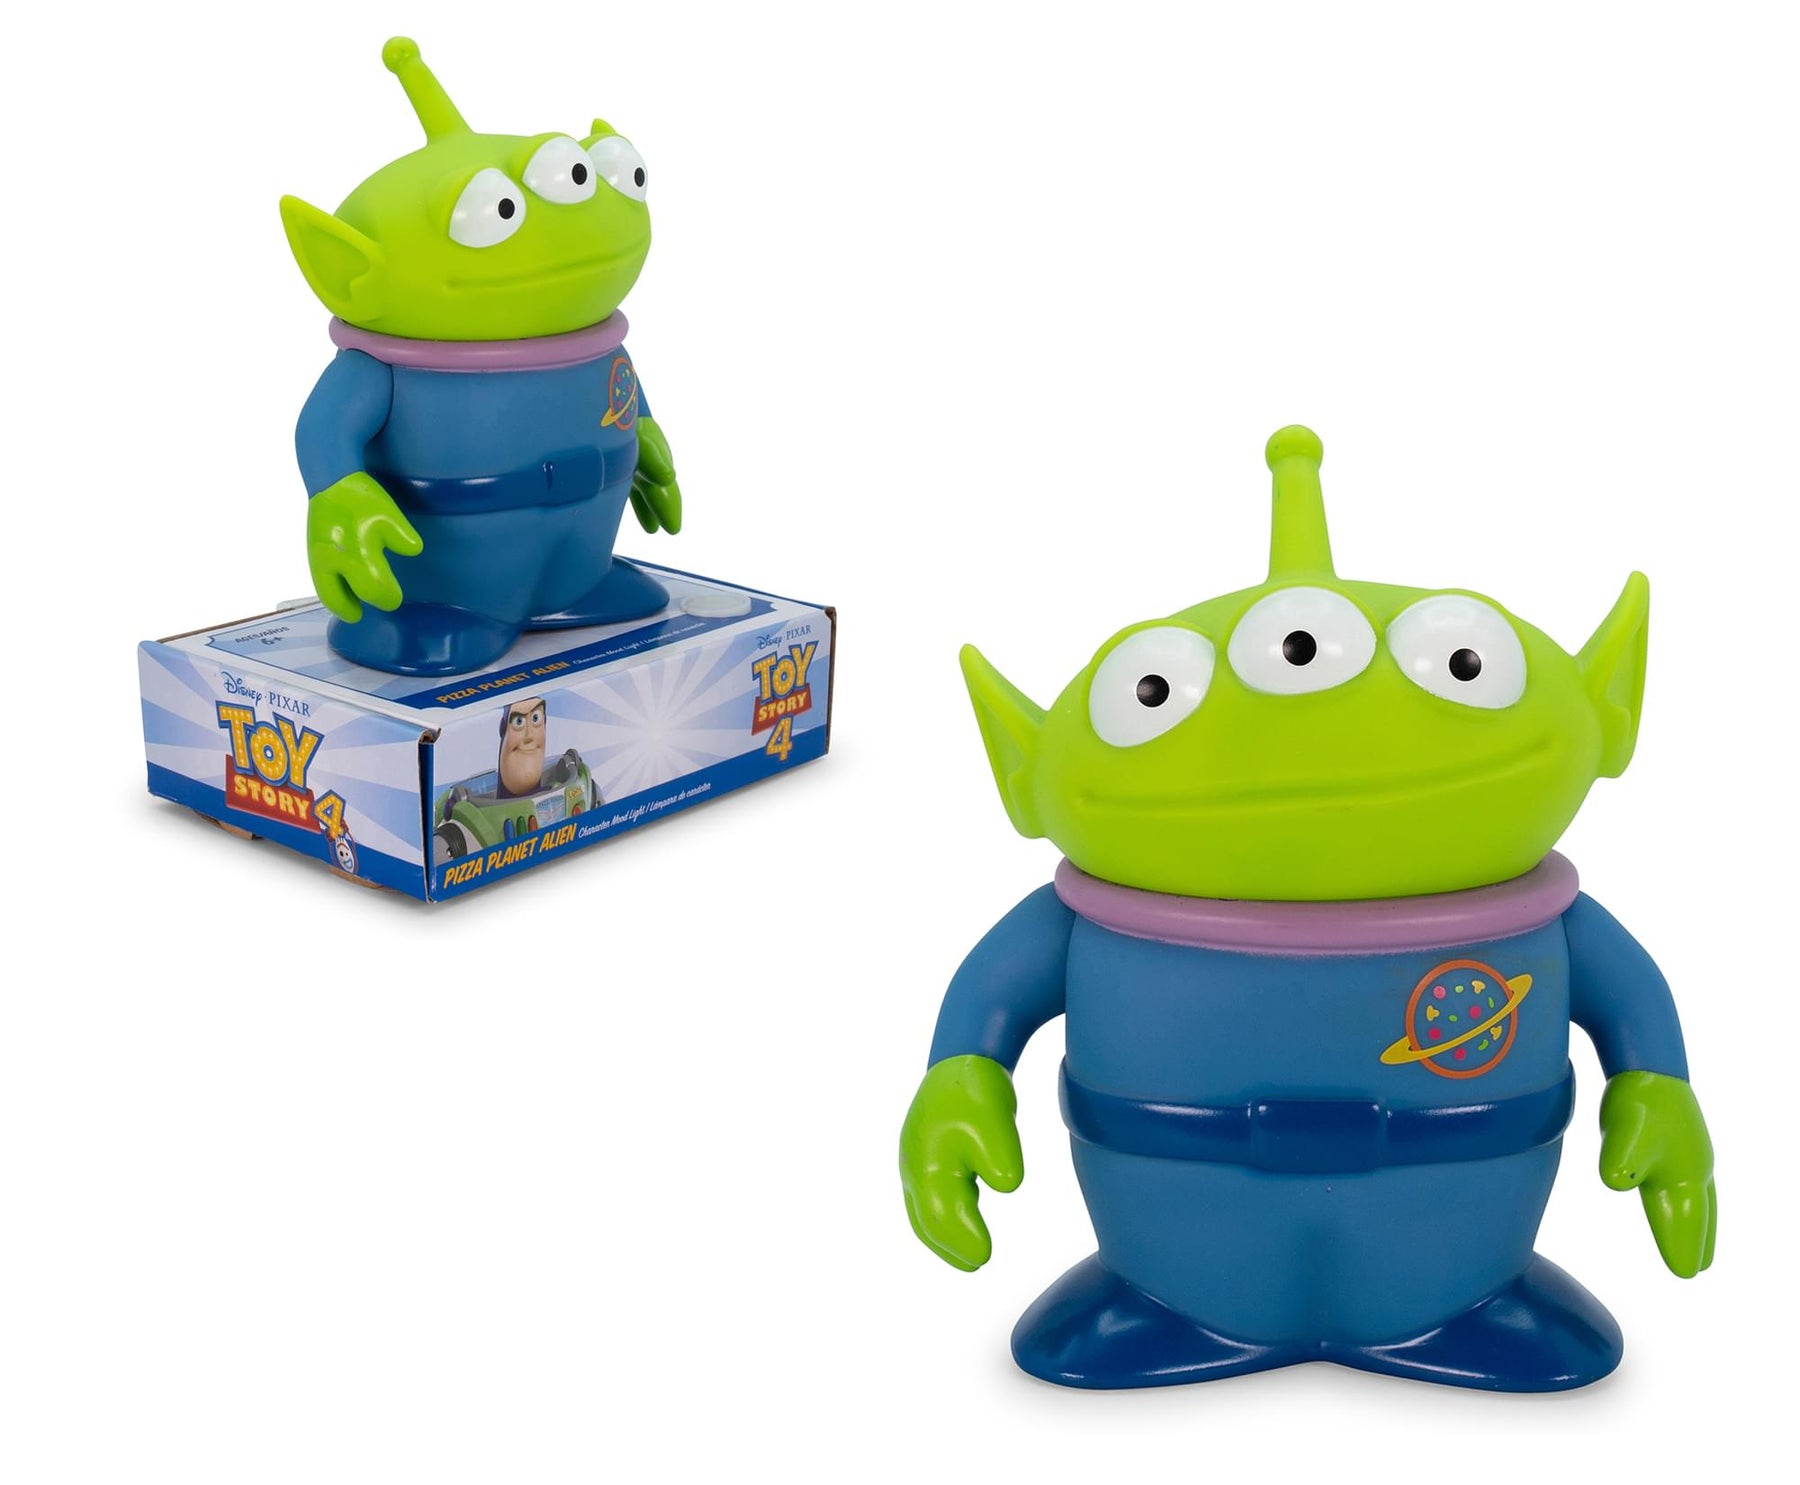 Disney Pixar Toy Story 4 Pizza Planet Alien Figural Mood Light | 6 Inches Tall